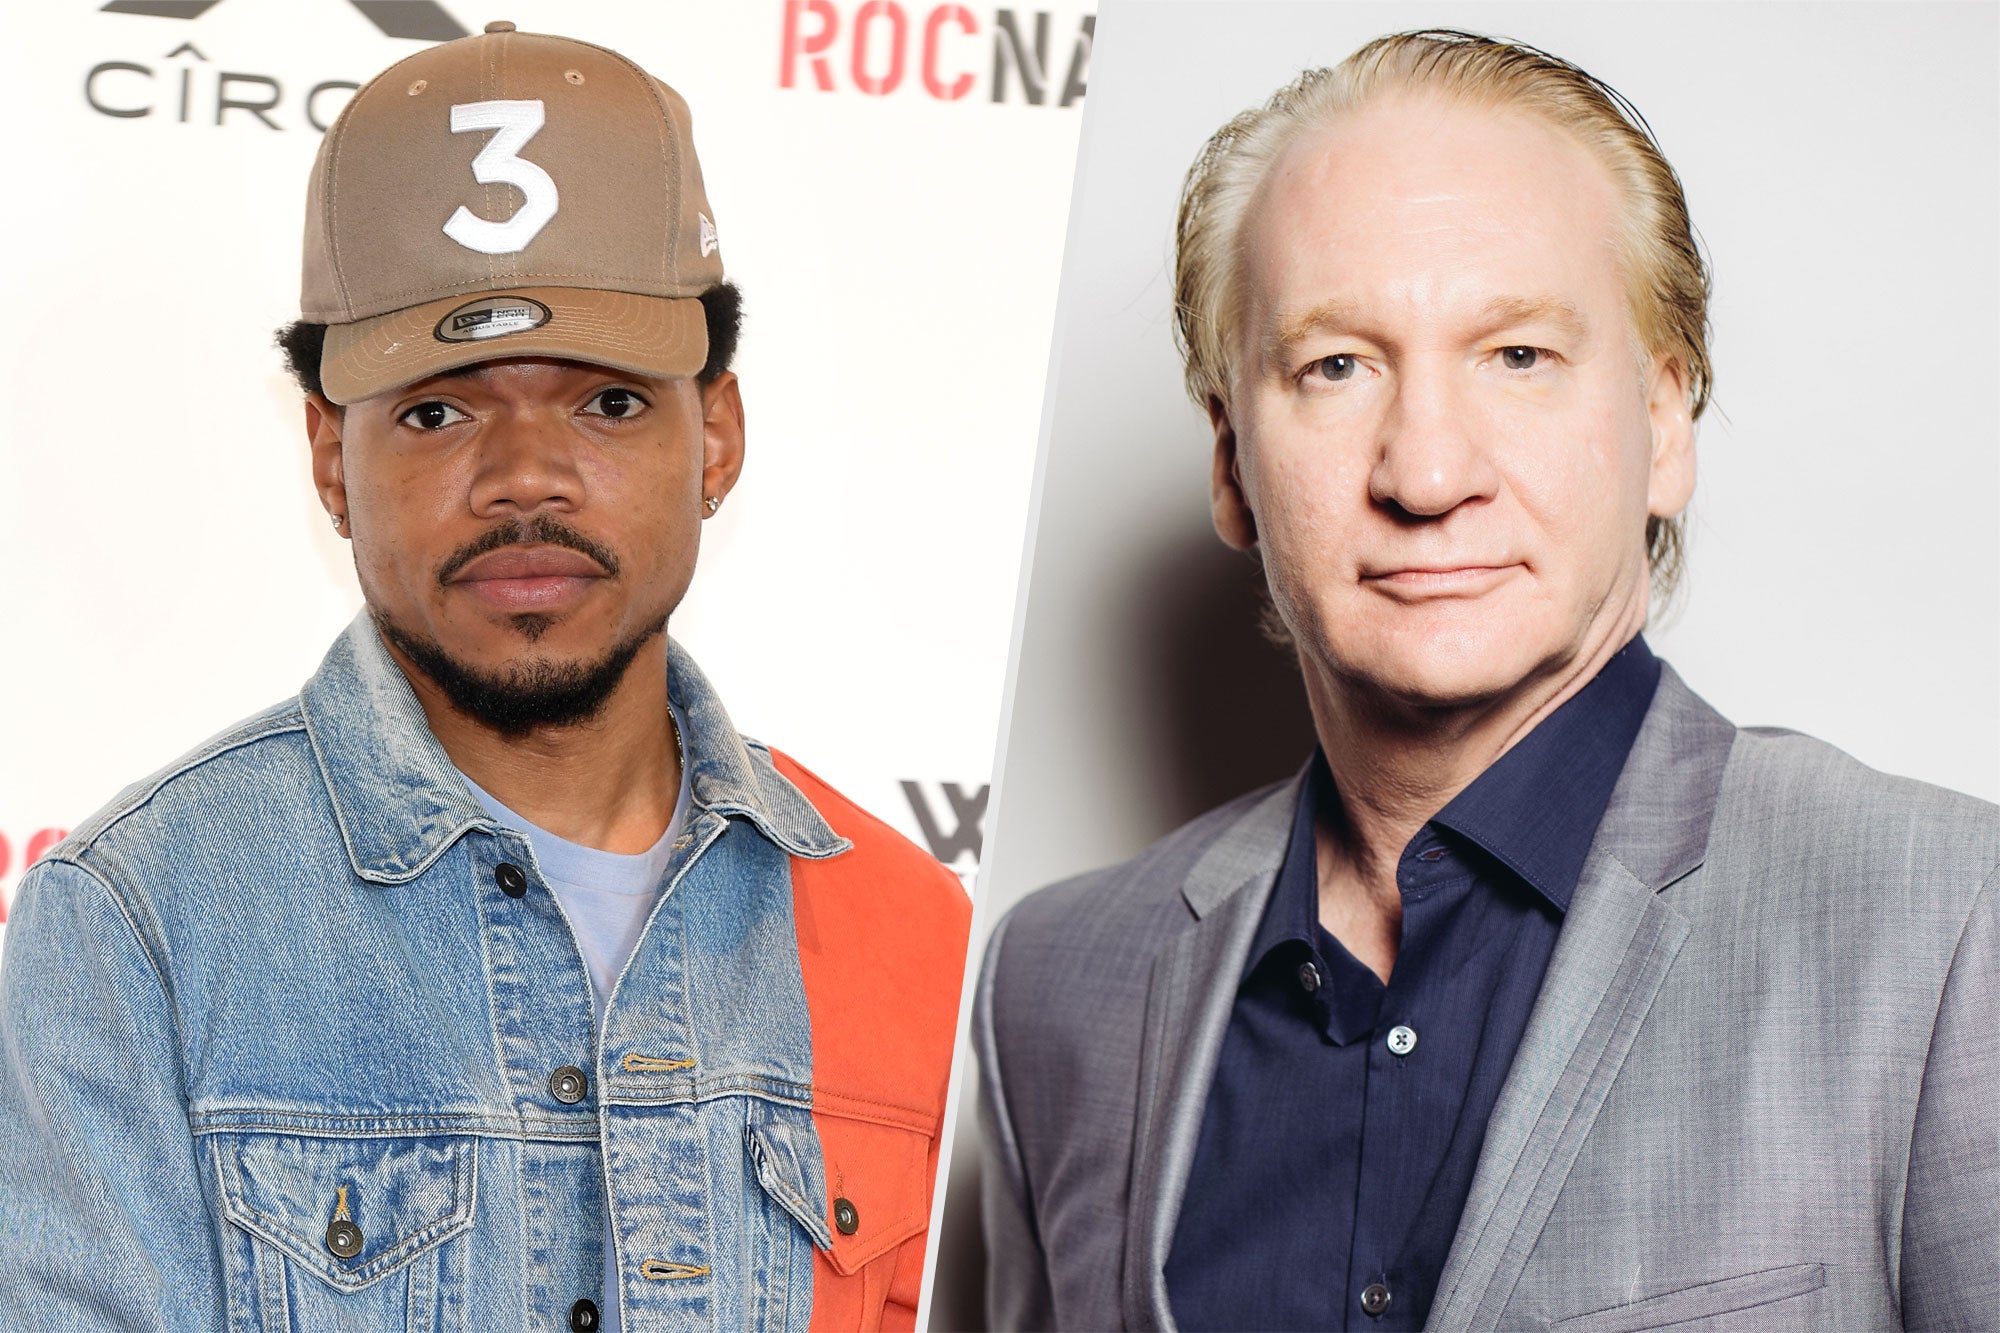 Chance the Rapper Asks HBO to Cut Bill Maher’s Show After Host Drops the N-Word on Air